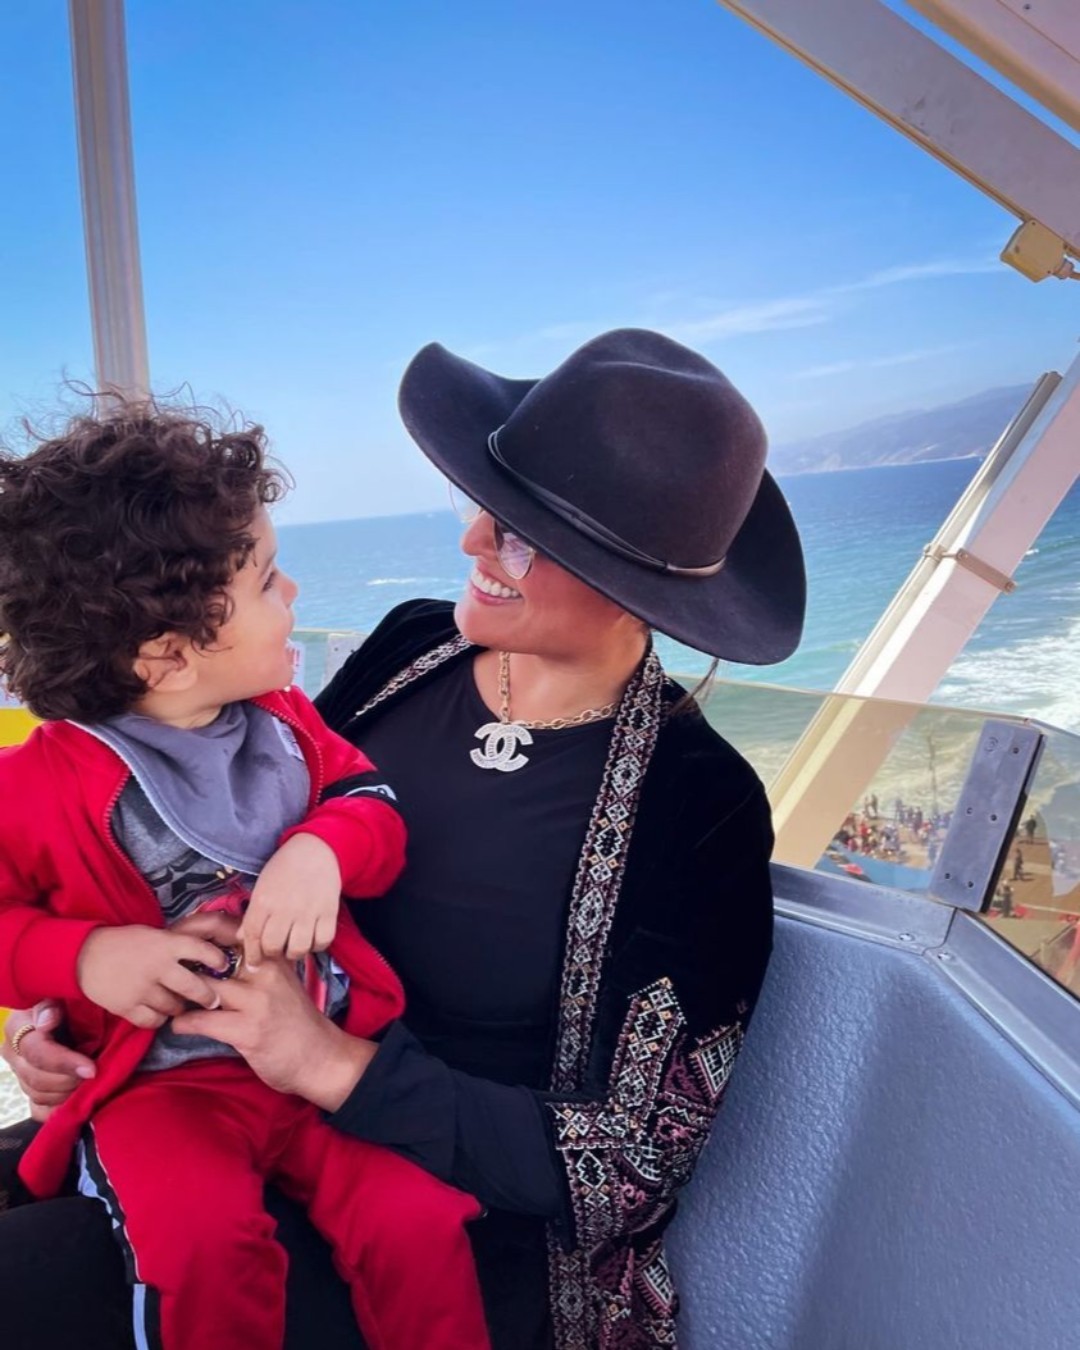 Whether the ride of life is going up or down, a mother is always there for you. 💕  📸: @whatthedoost
●
●
●
#santamonicapier #santamonica #pacpark #pacificpark #mothersday